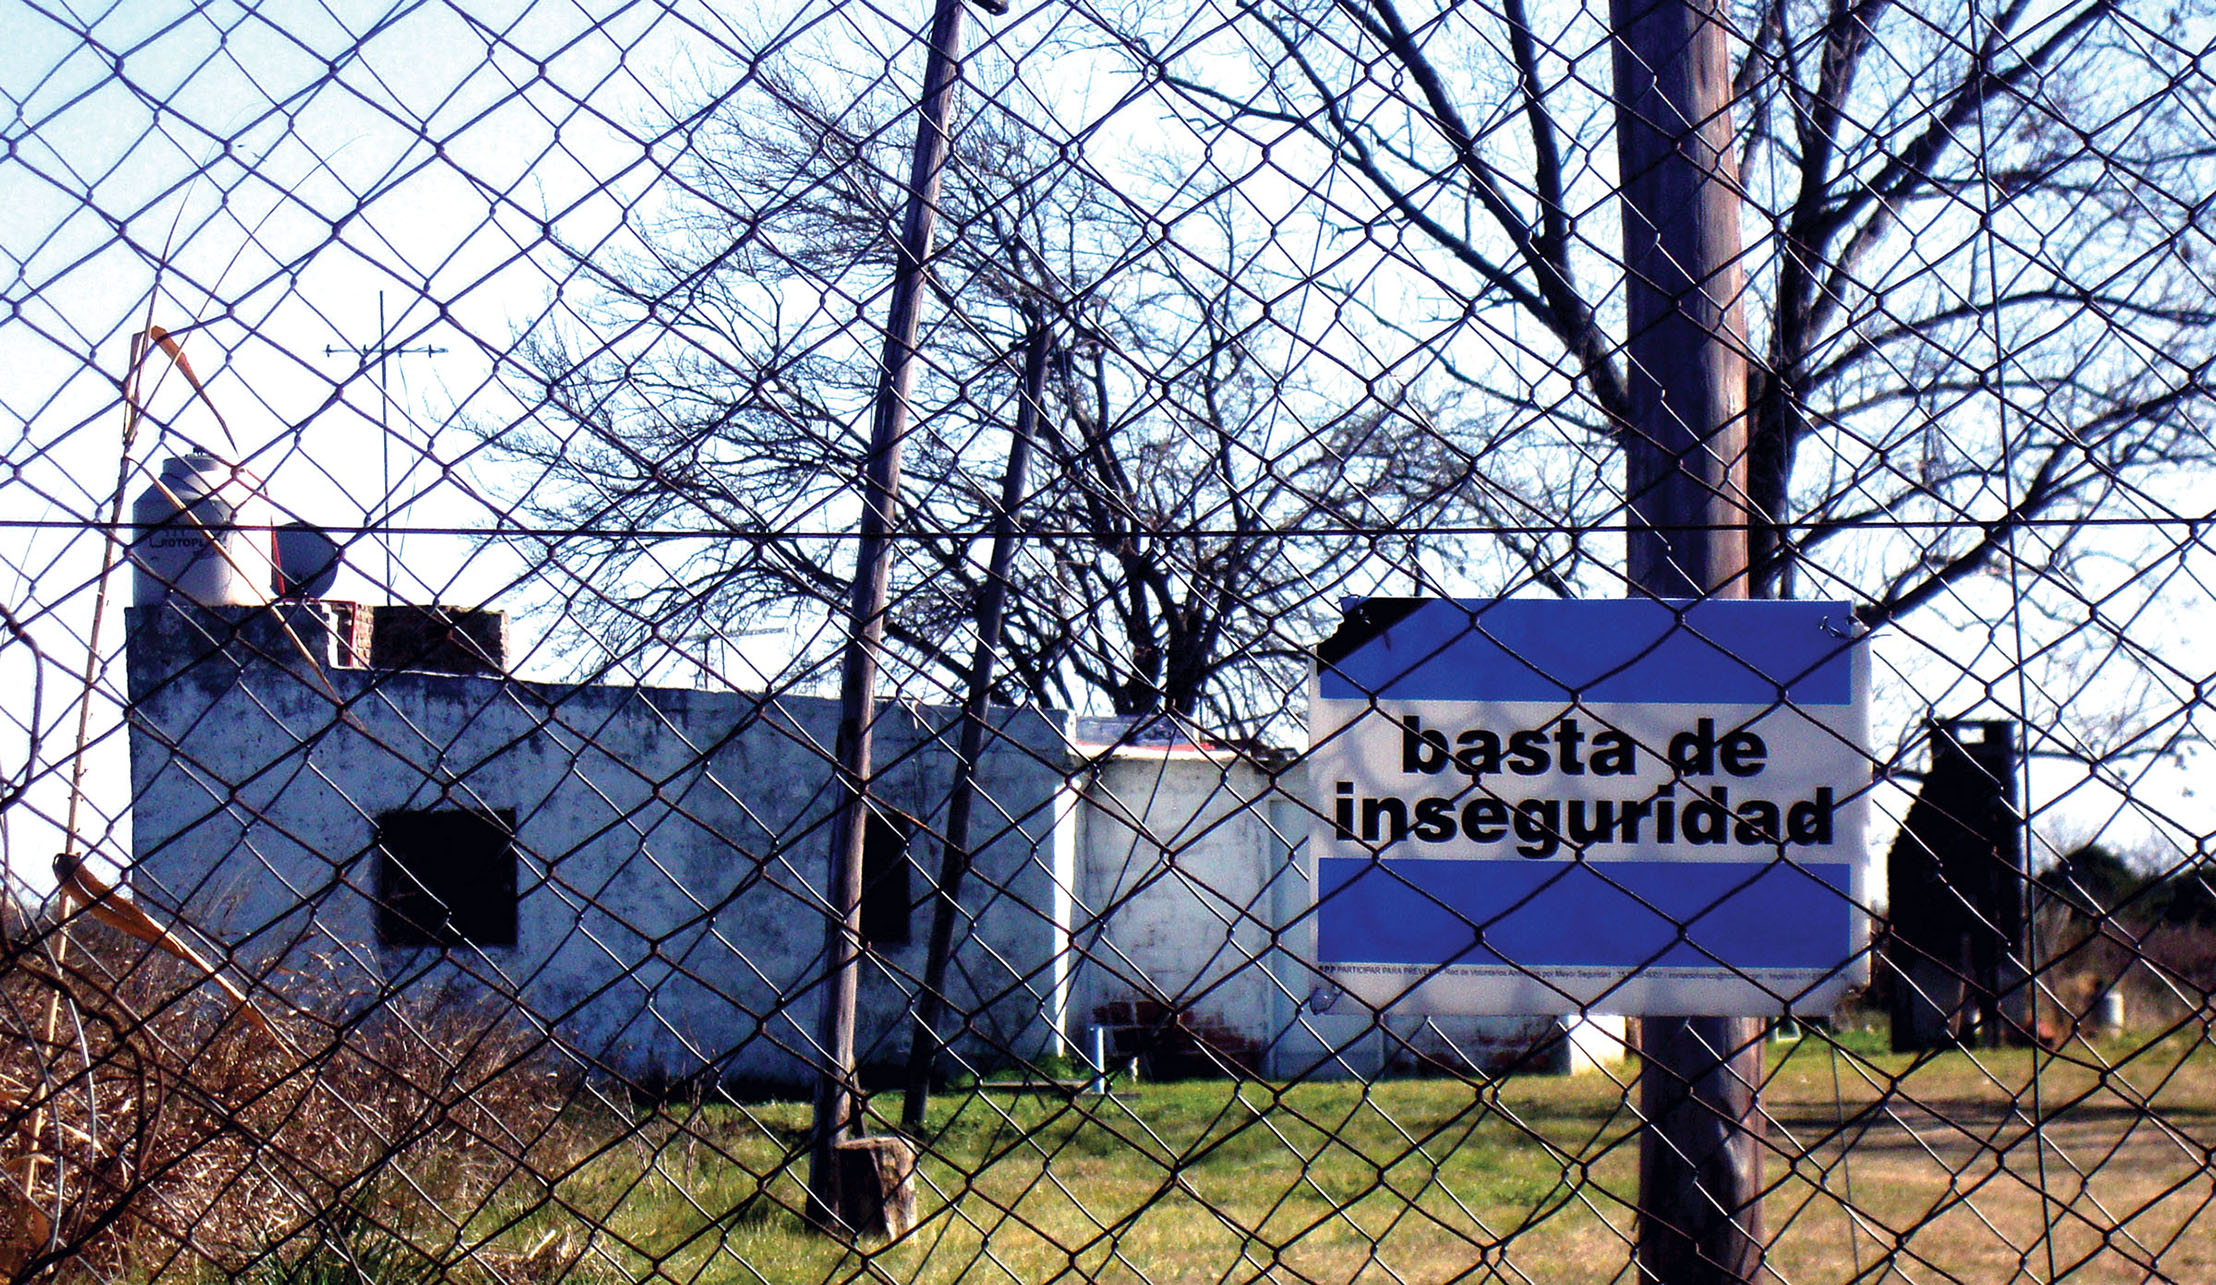 A sign reading “enough insecurity” over the form of the Argentine flag hangs from a tall fence. (Photo by Asa Perry.)